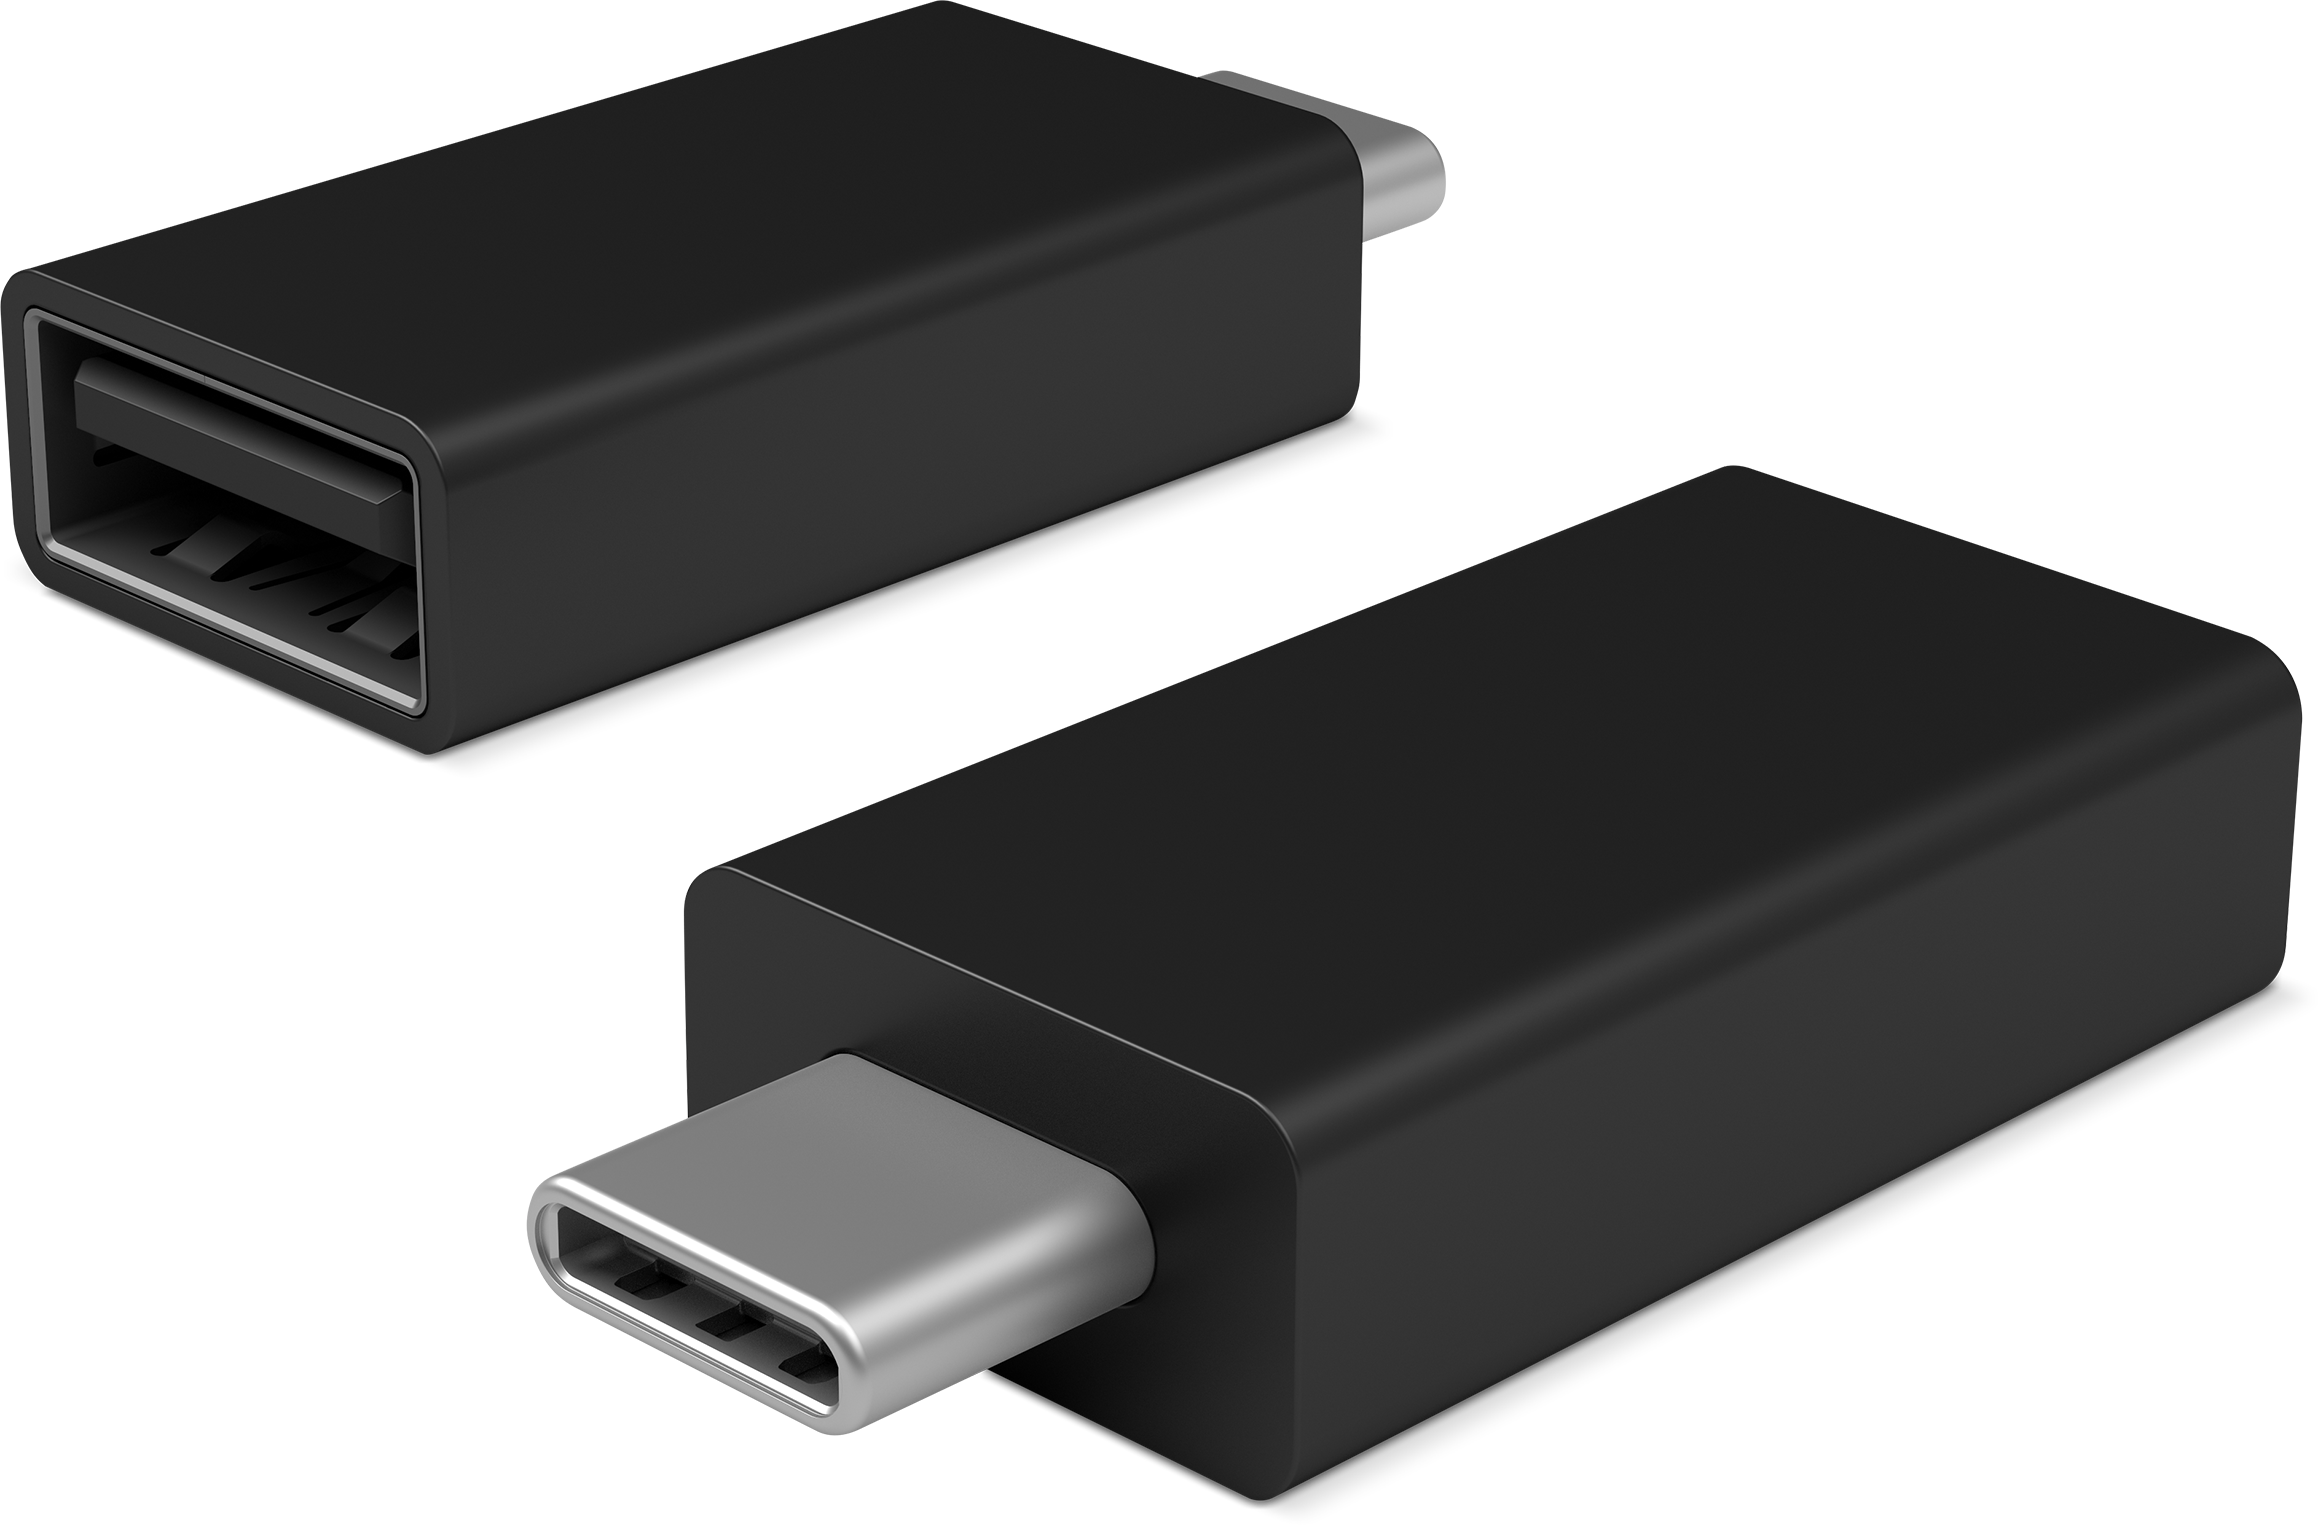 usb c to usb connector